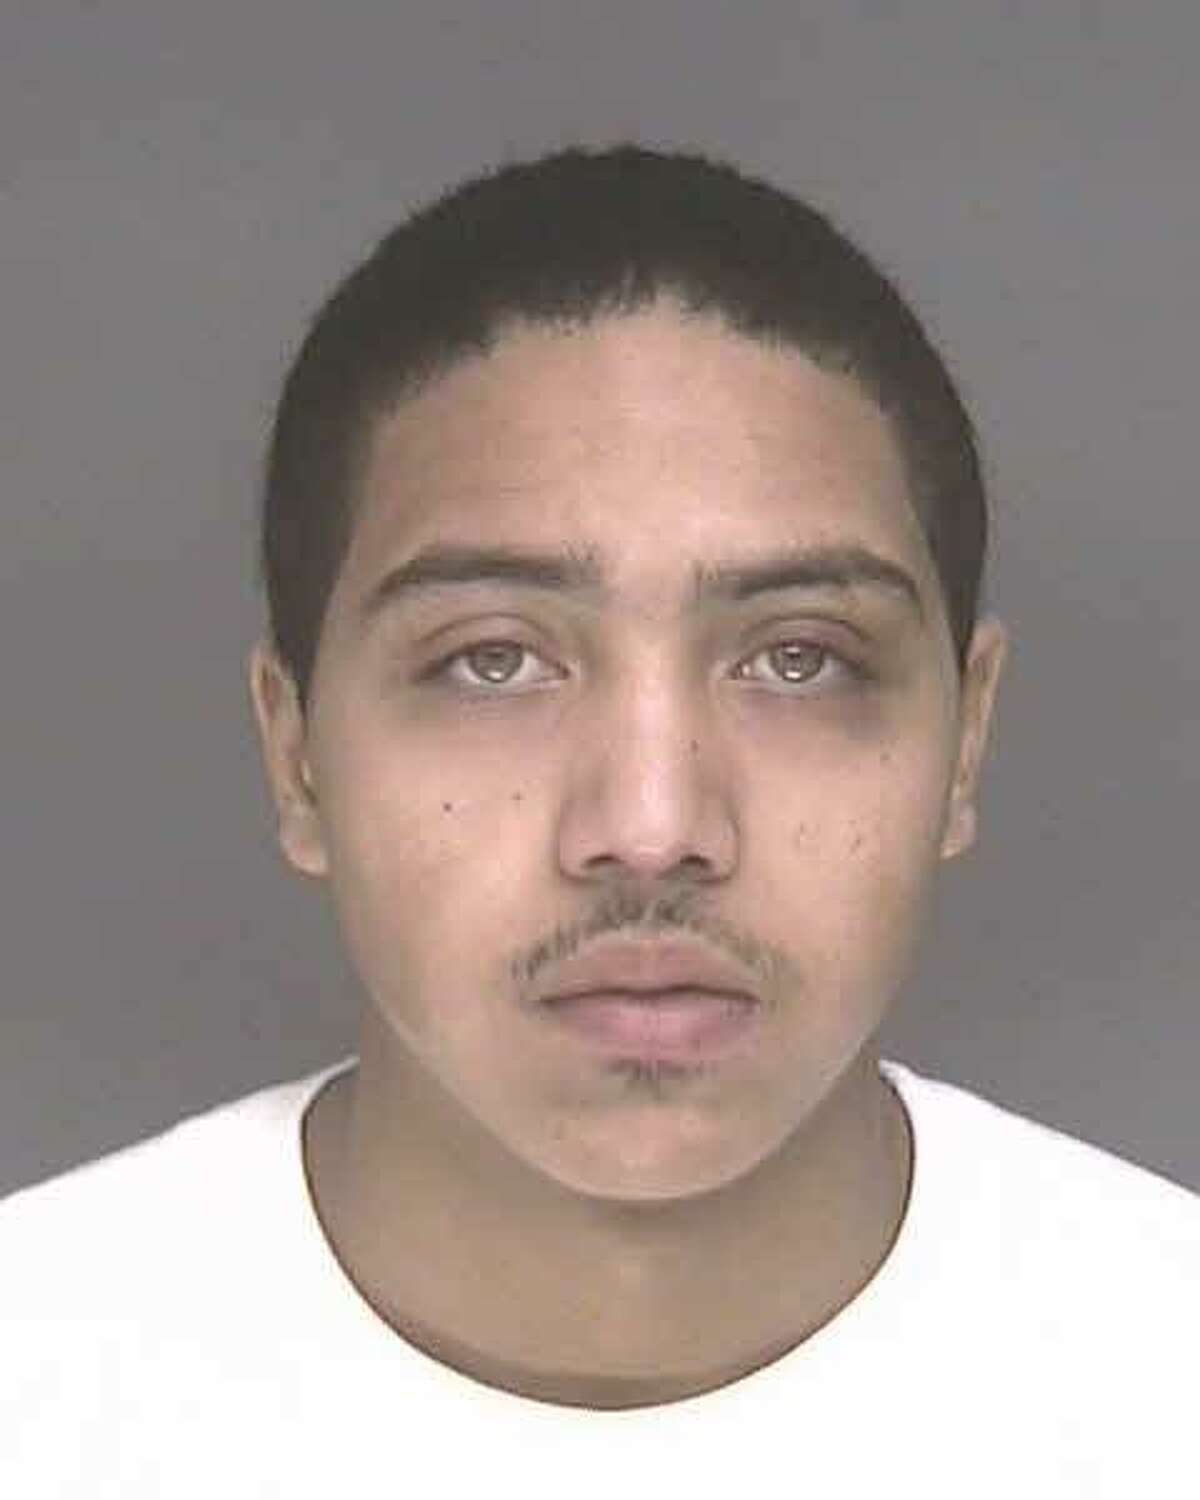 Police are searching for Miguel Rojas, 28, who allegedly shot the boyfriend of his children’s mother.